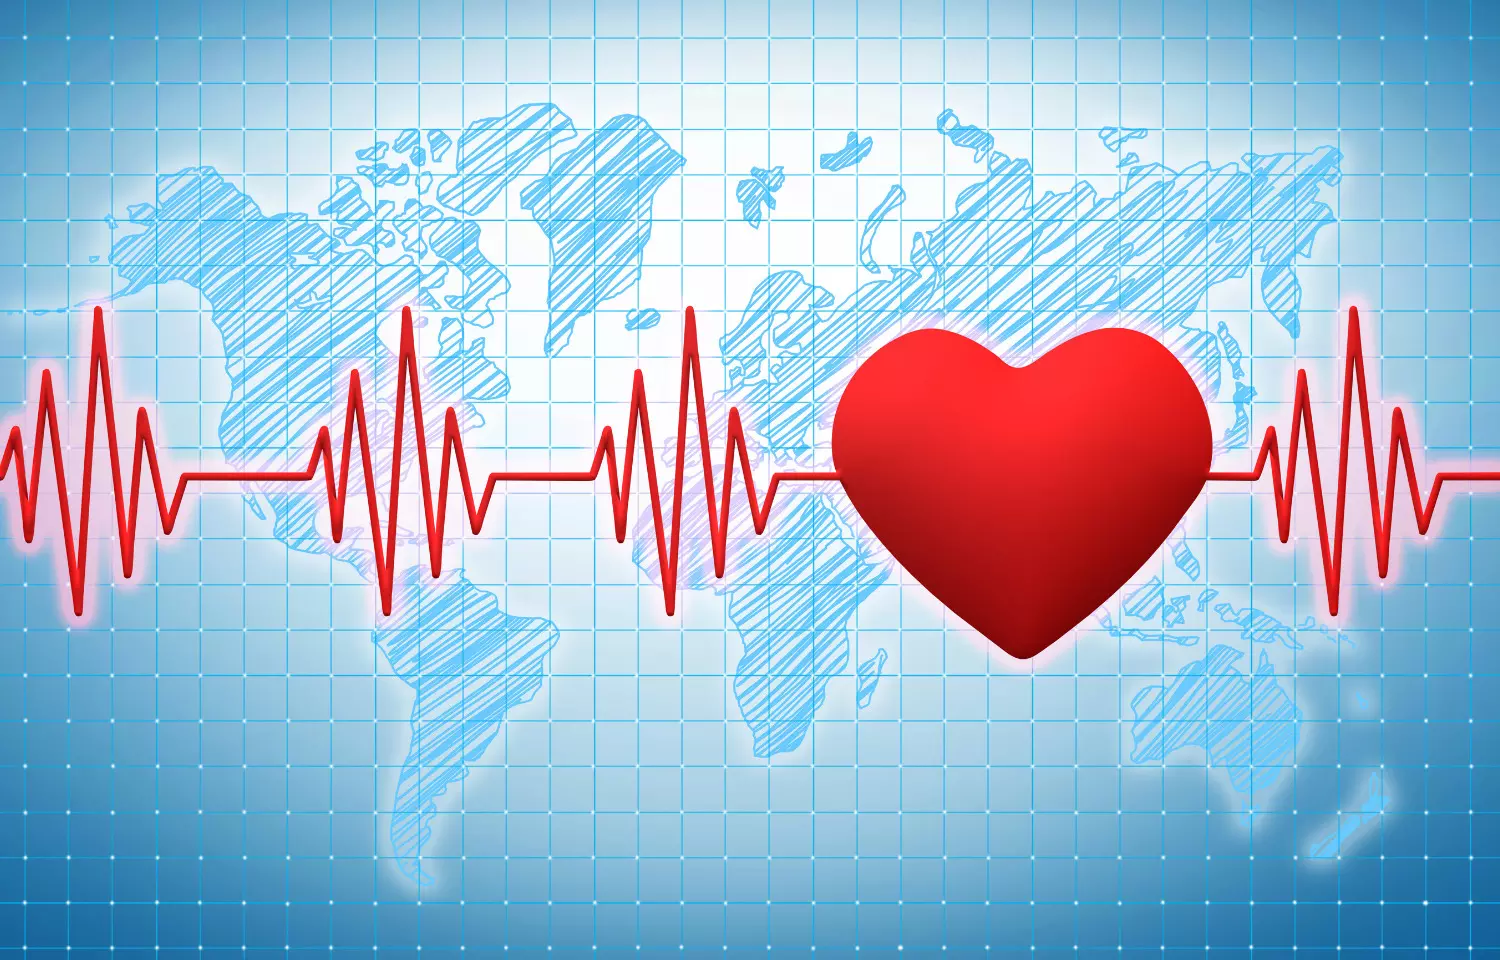 Implantable heart monitor doesnt benefit heart attack survivors overall